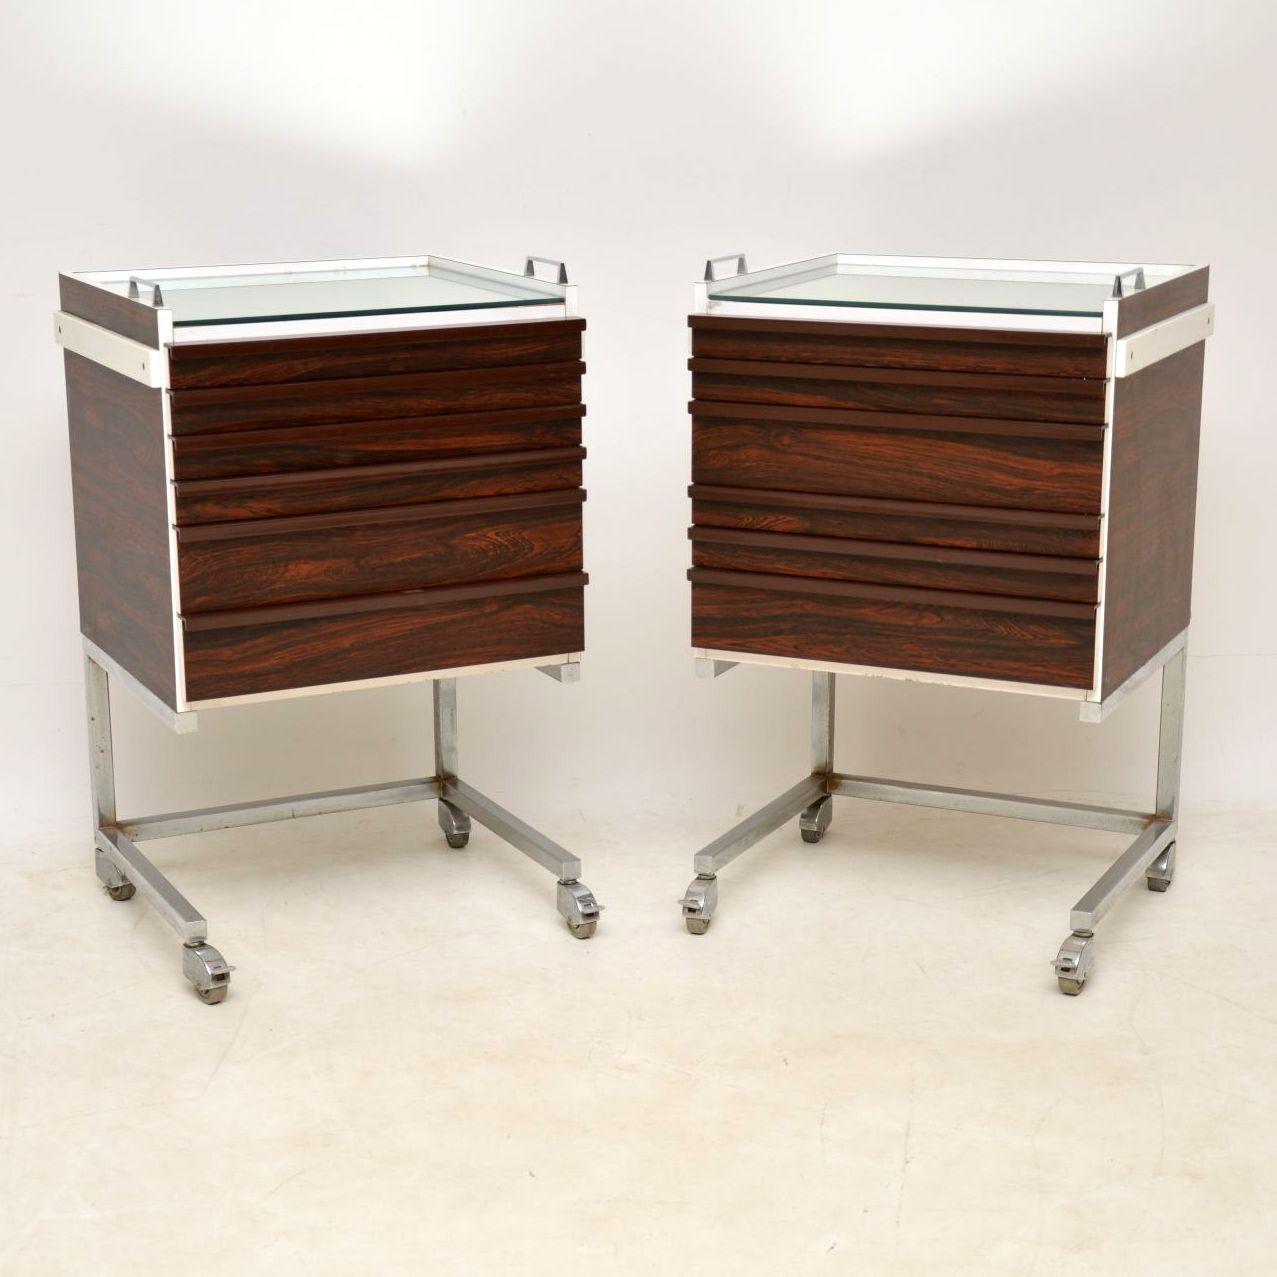 European 1970s Pair of Vintage Wood and Chrome Chests